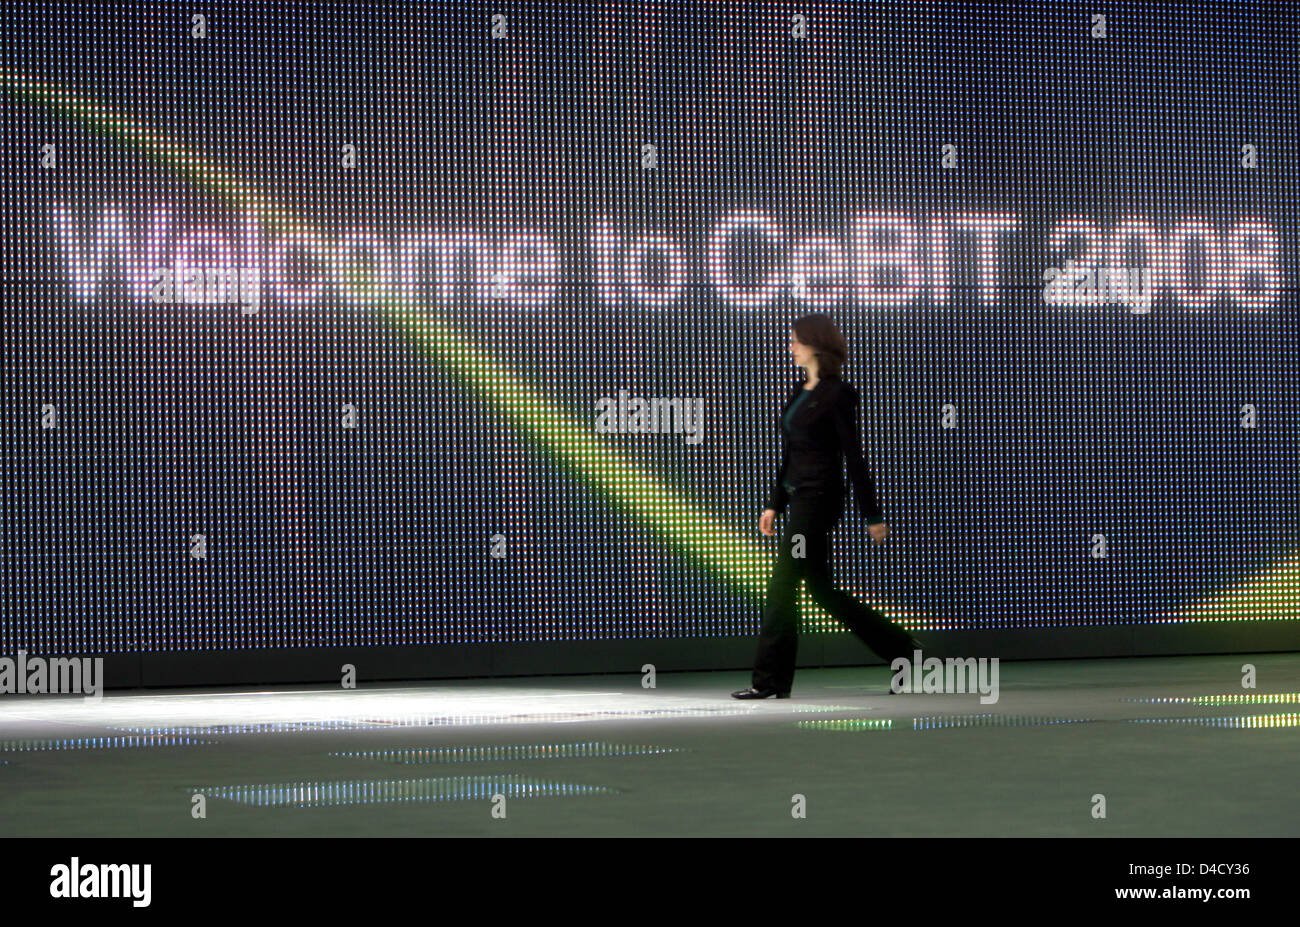 A visitors walks past a huge video screen reading ' Welcome to CeBIT 2008' at the CeBIT in Hanover, Germany, 03 March 2008. From 04 through 10 March, some 5,500 exhibitors from 75 countries showcase their latest products at the world's largest trade fair on digital IT and telecommunications solutions for home and work environments. Photo: KAY NIETFELD Stock Photo